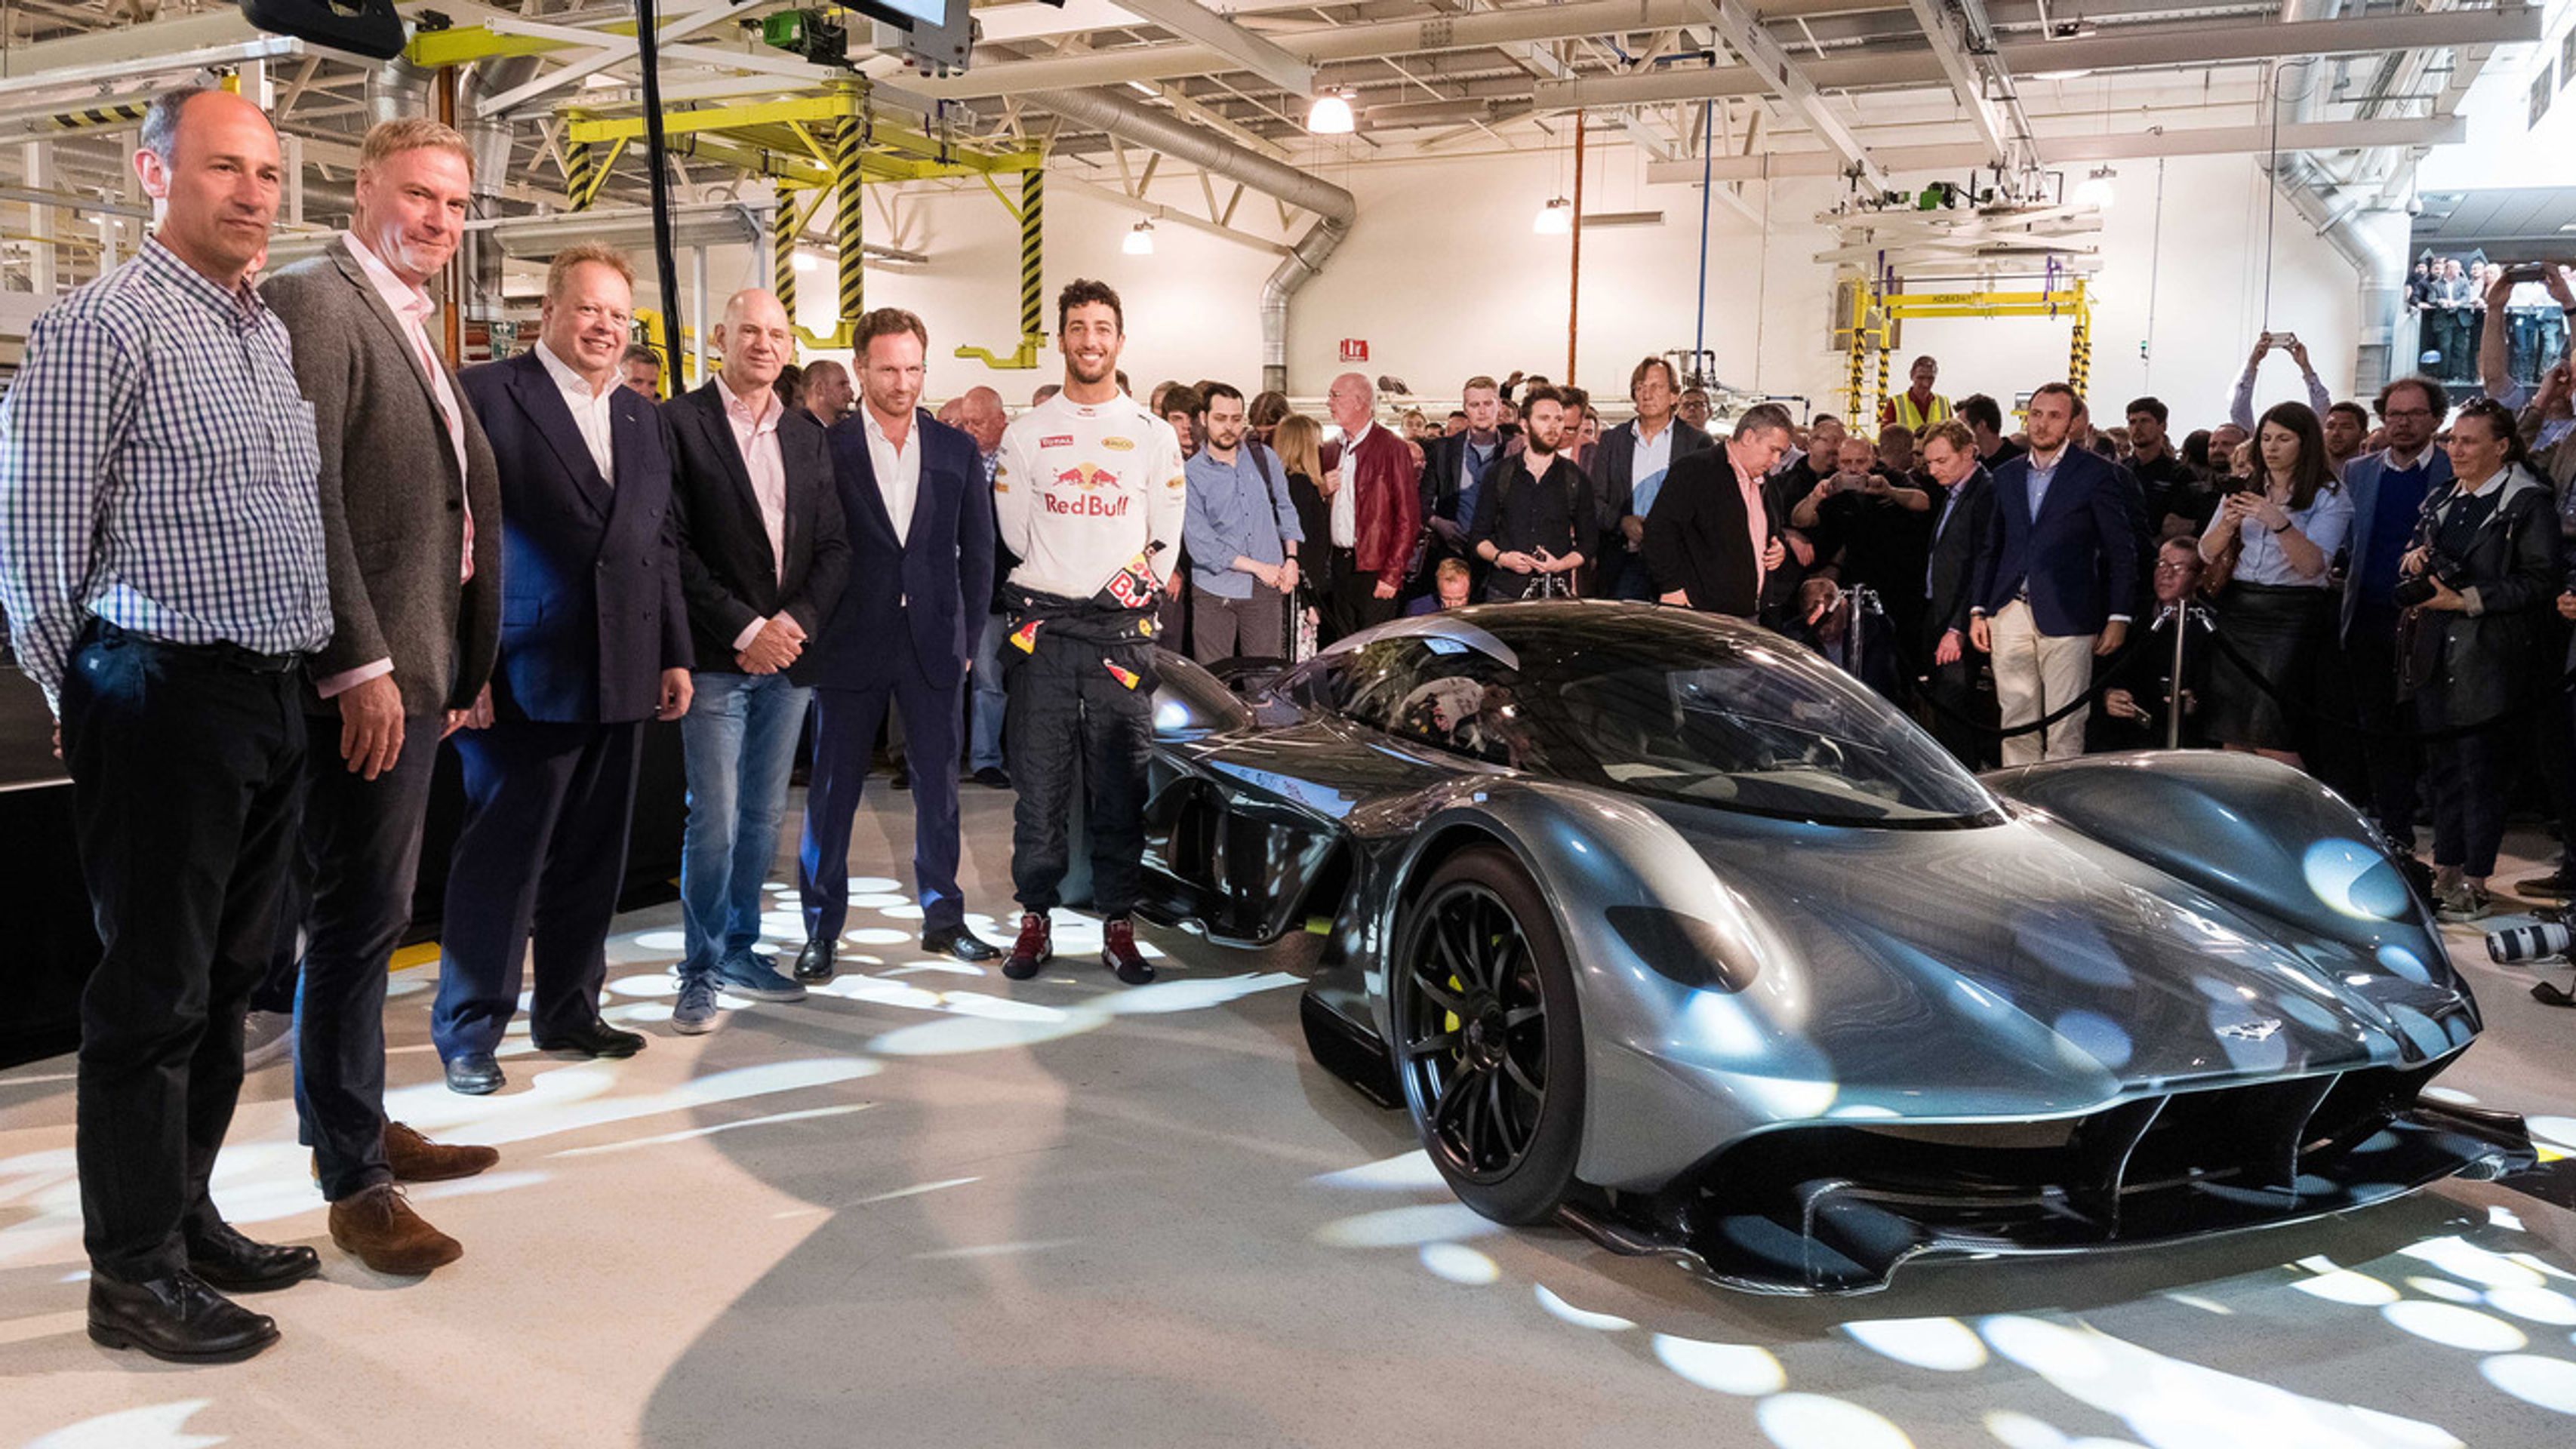 AM-RB 001 - 13 - GALERIE: AM-RB 001 (2/7)